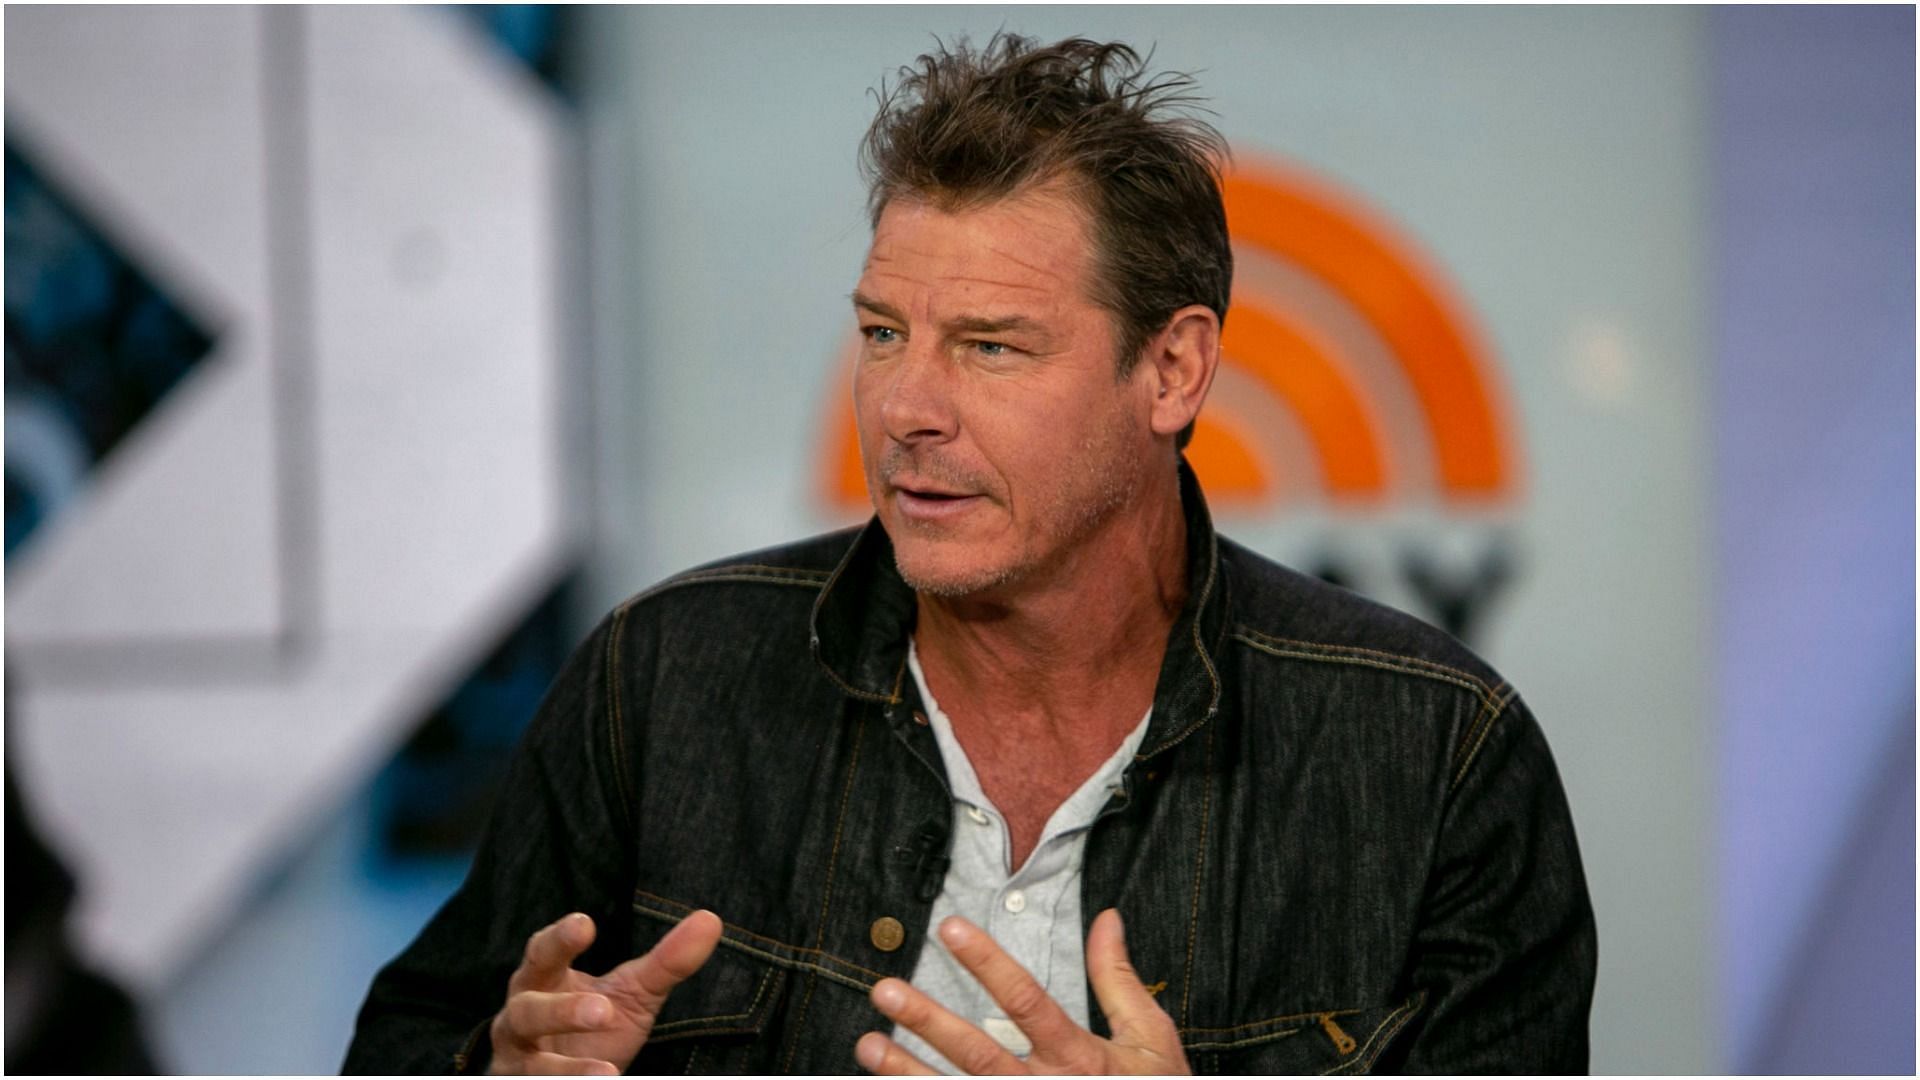 Ty Pennington and Kelle Merrell recently got married (Image by Zach Pagano/NBCU Photo Bank/NBCUniversal via Getty Images)